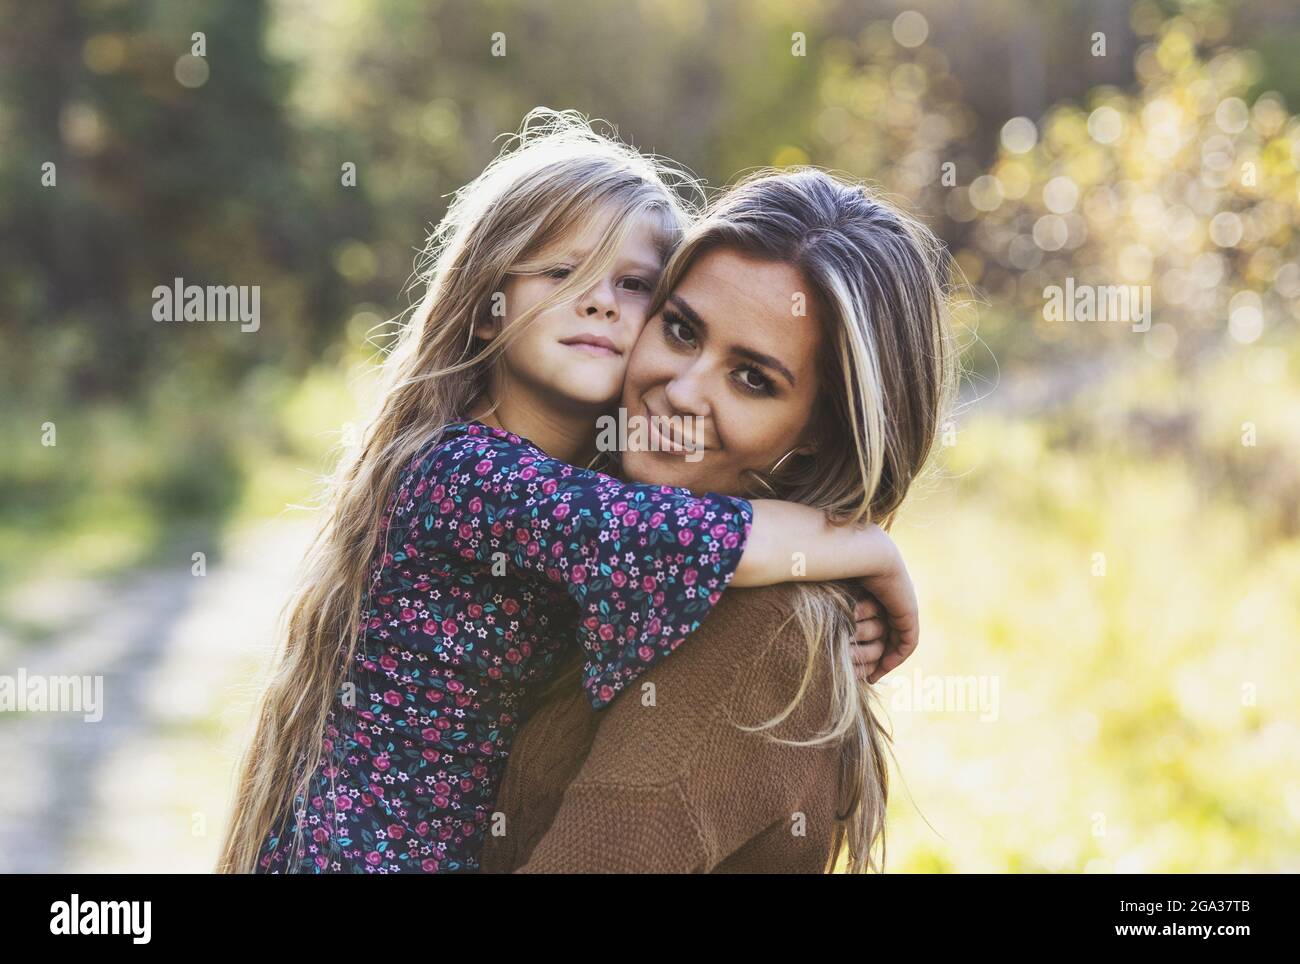 Portrait of a mother with her young daughter, outdoors in a city park; Edmonton, Alberta, Canada Stock Photo